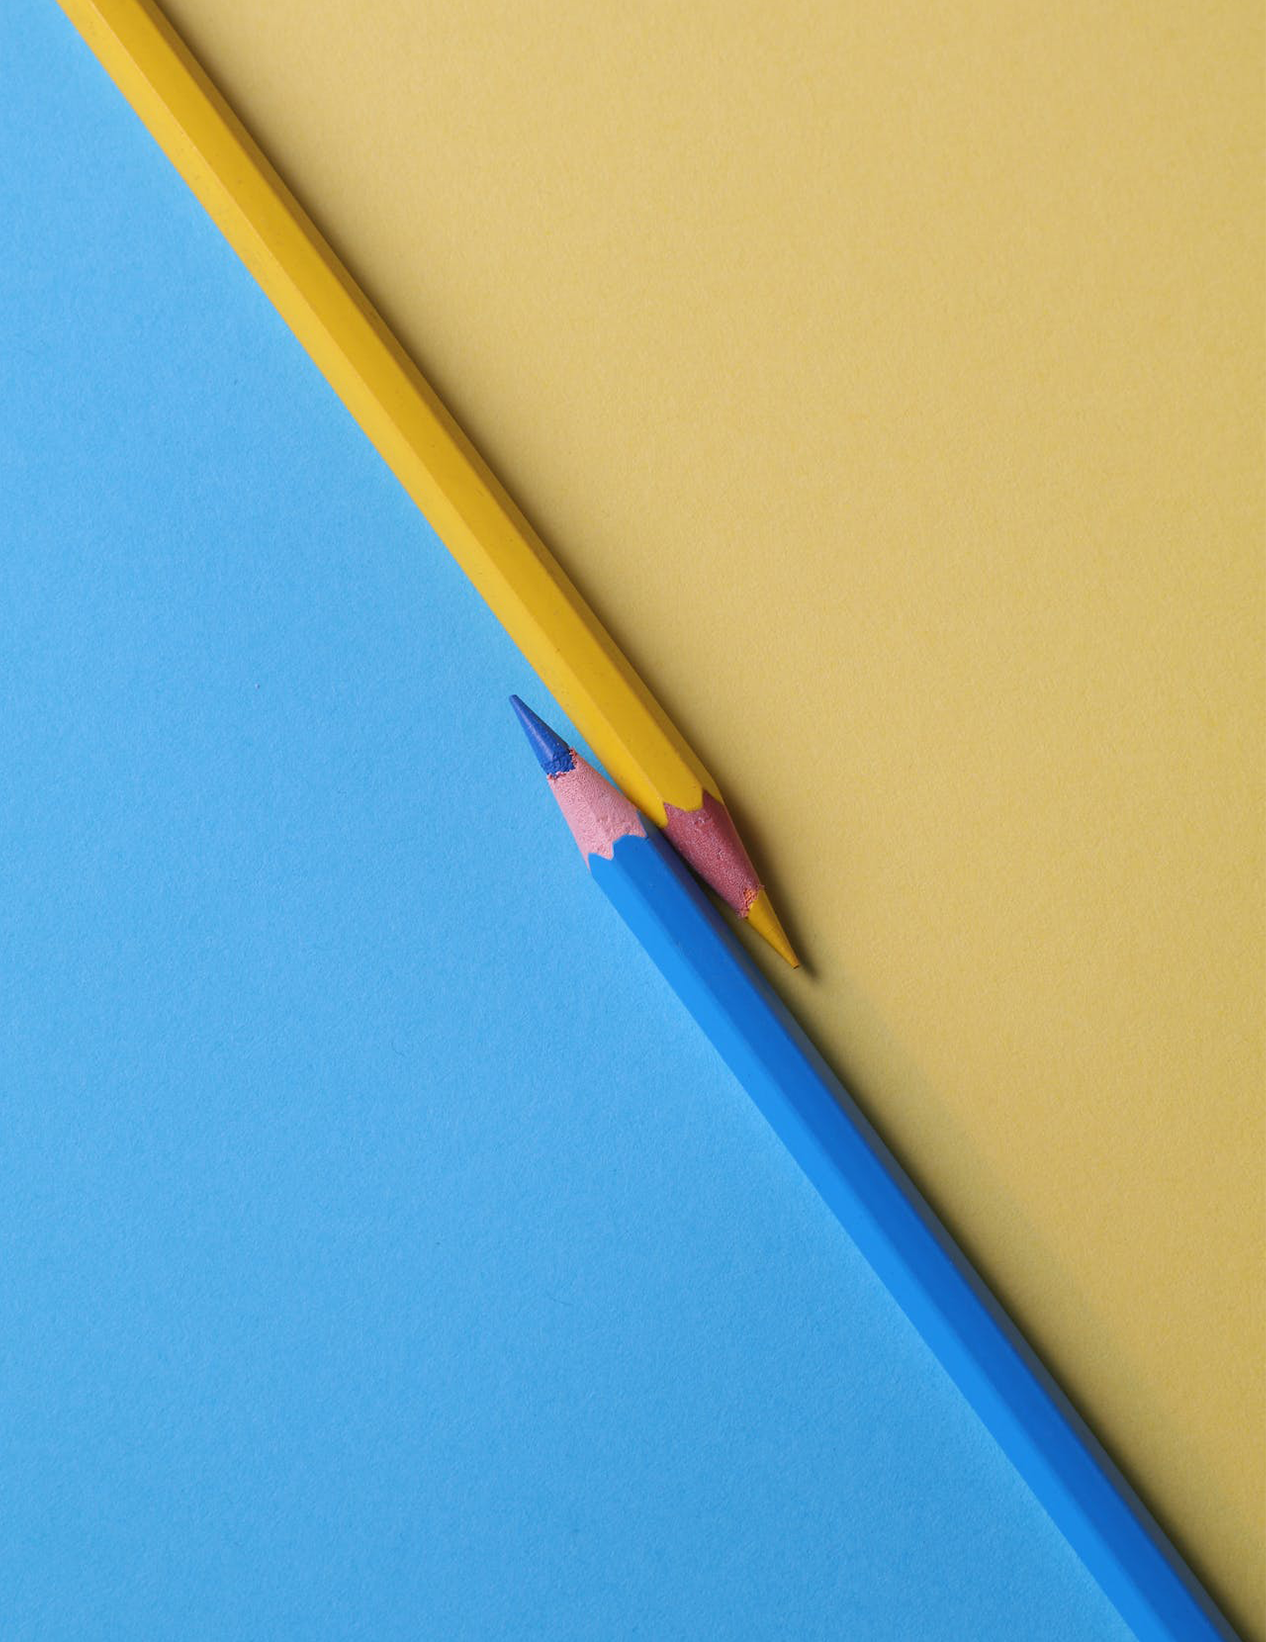 A blue and yellow pencil meeting diagonally with their sides respectively coloured